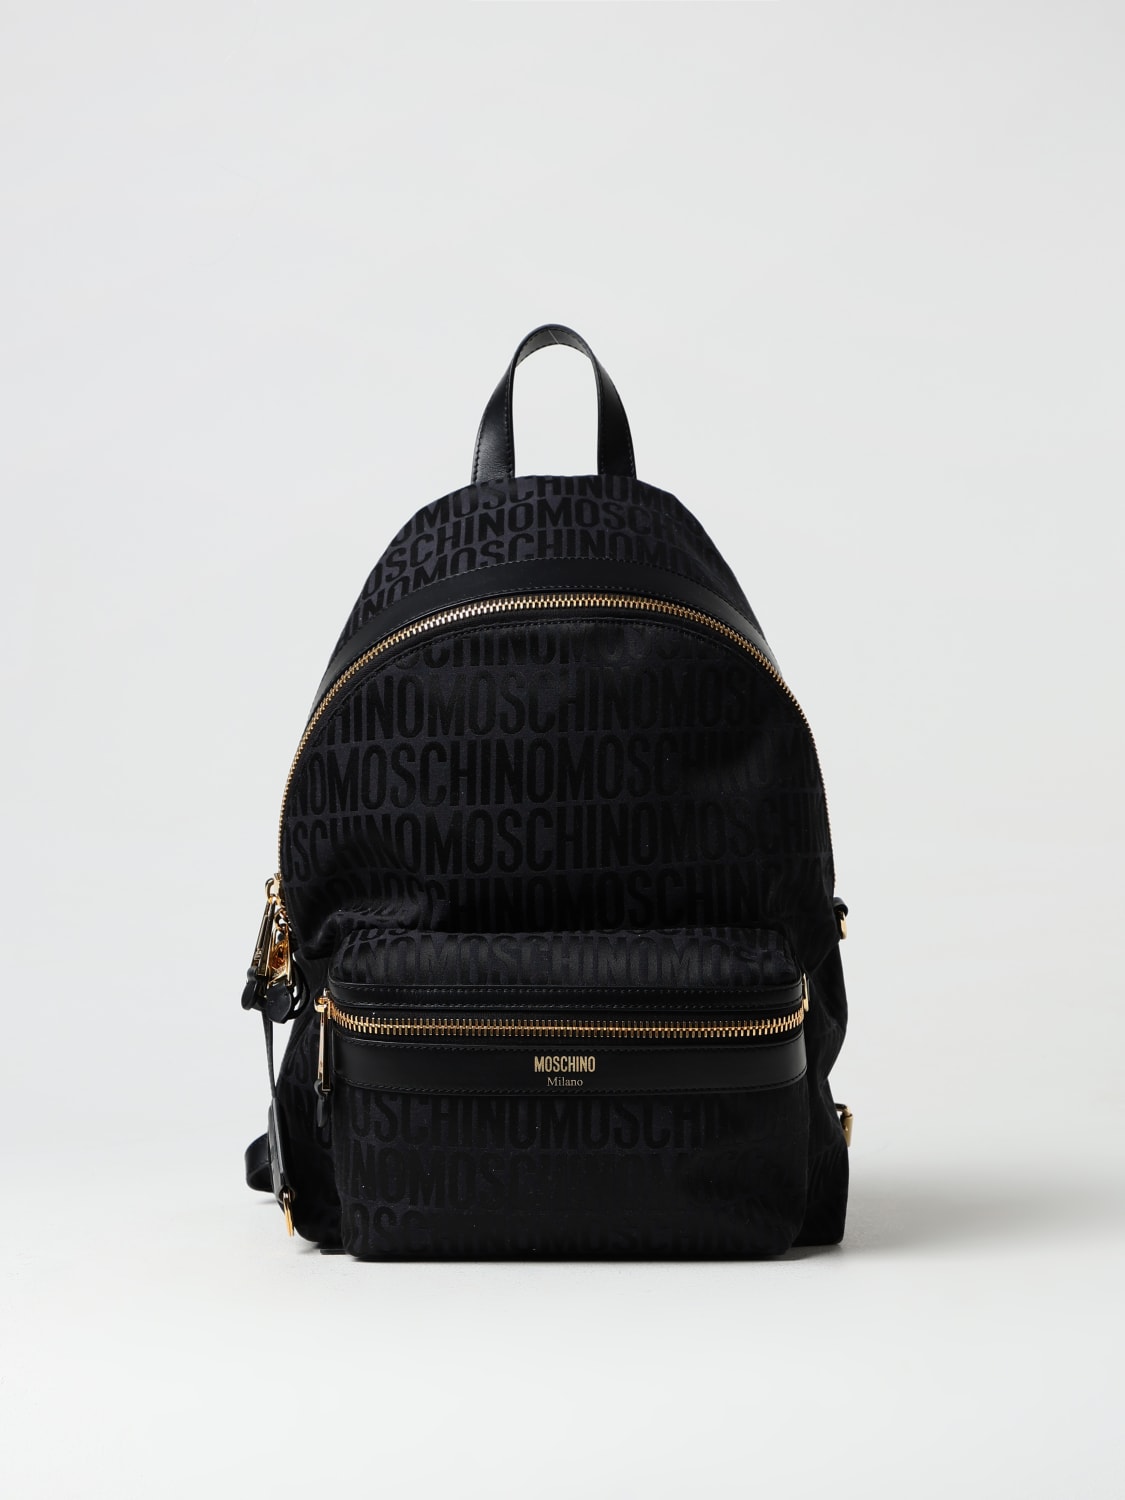 MOSCHINO COUTURE: Backpack men - Black | Moschino Couture backpack 76018268  online at GIGLIO.COM